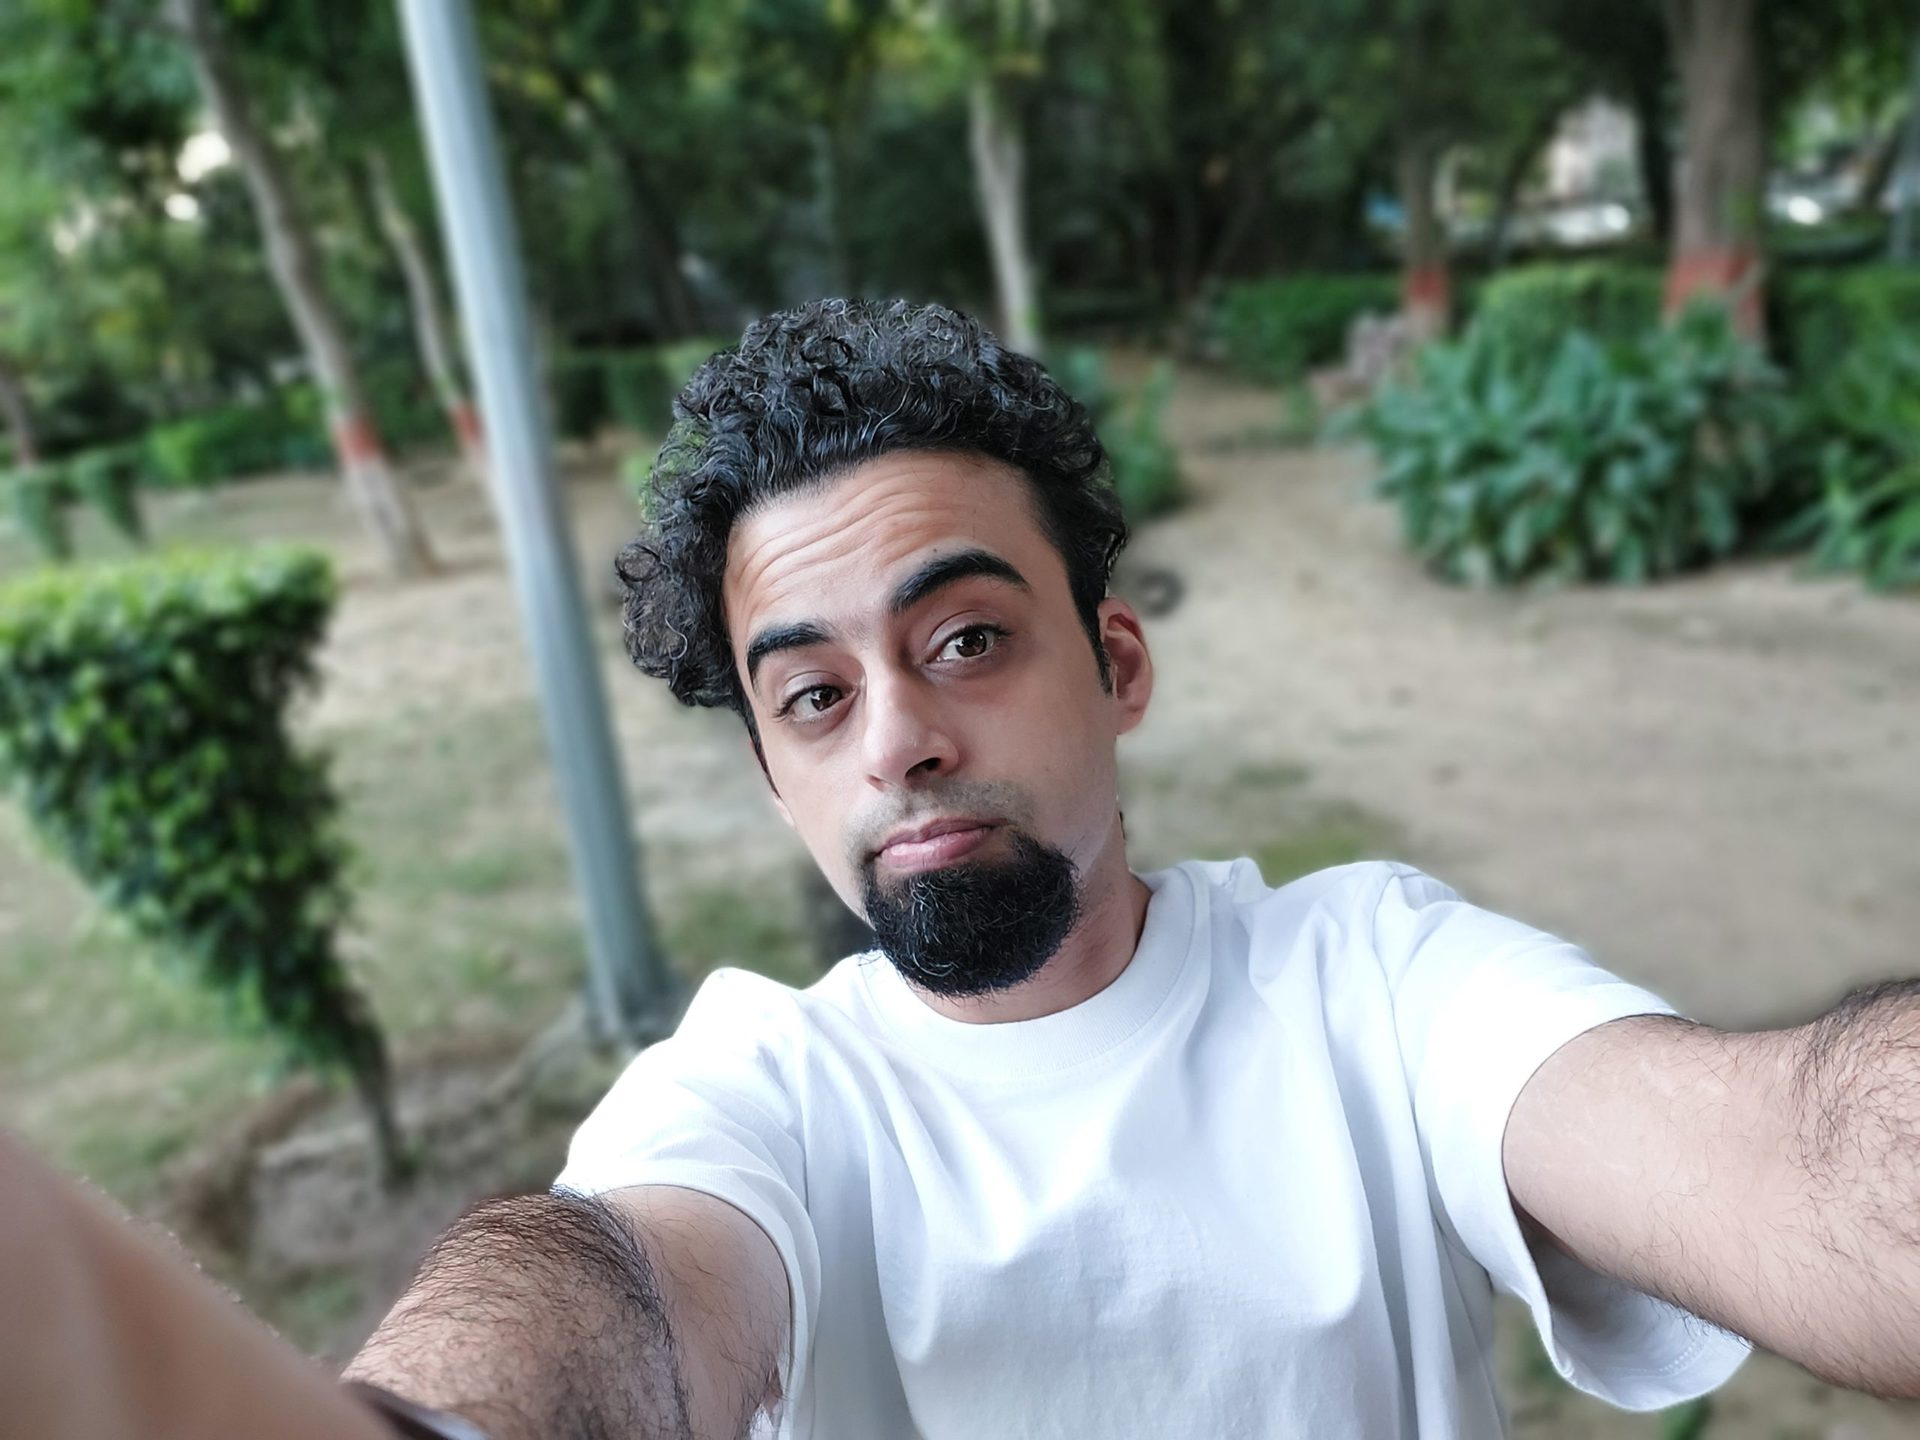 Samsung Galaxy M52 camera sample selfie ultrawide portrait of a man with dark curly hair and a beard wearing a white t-shirt outdoors